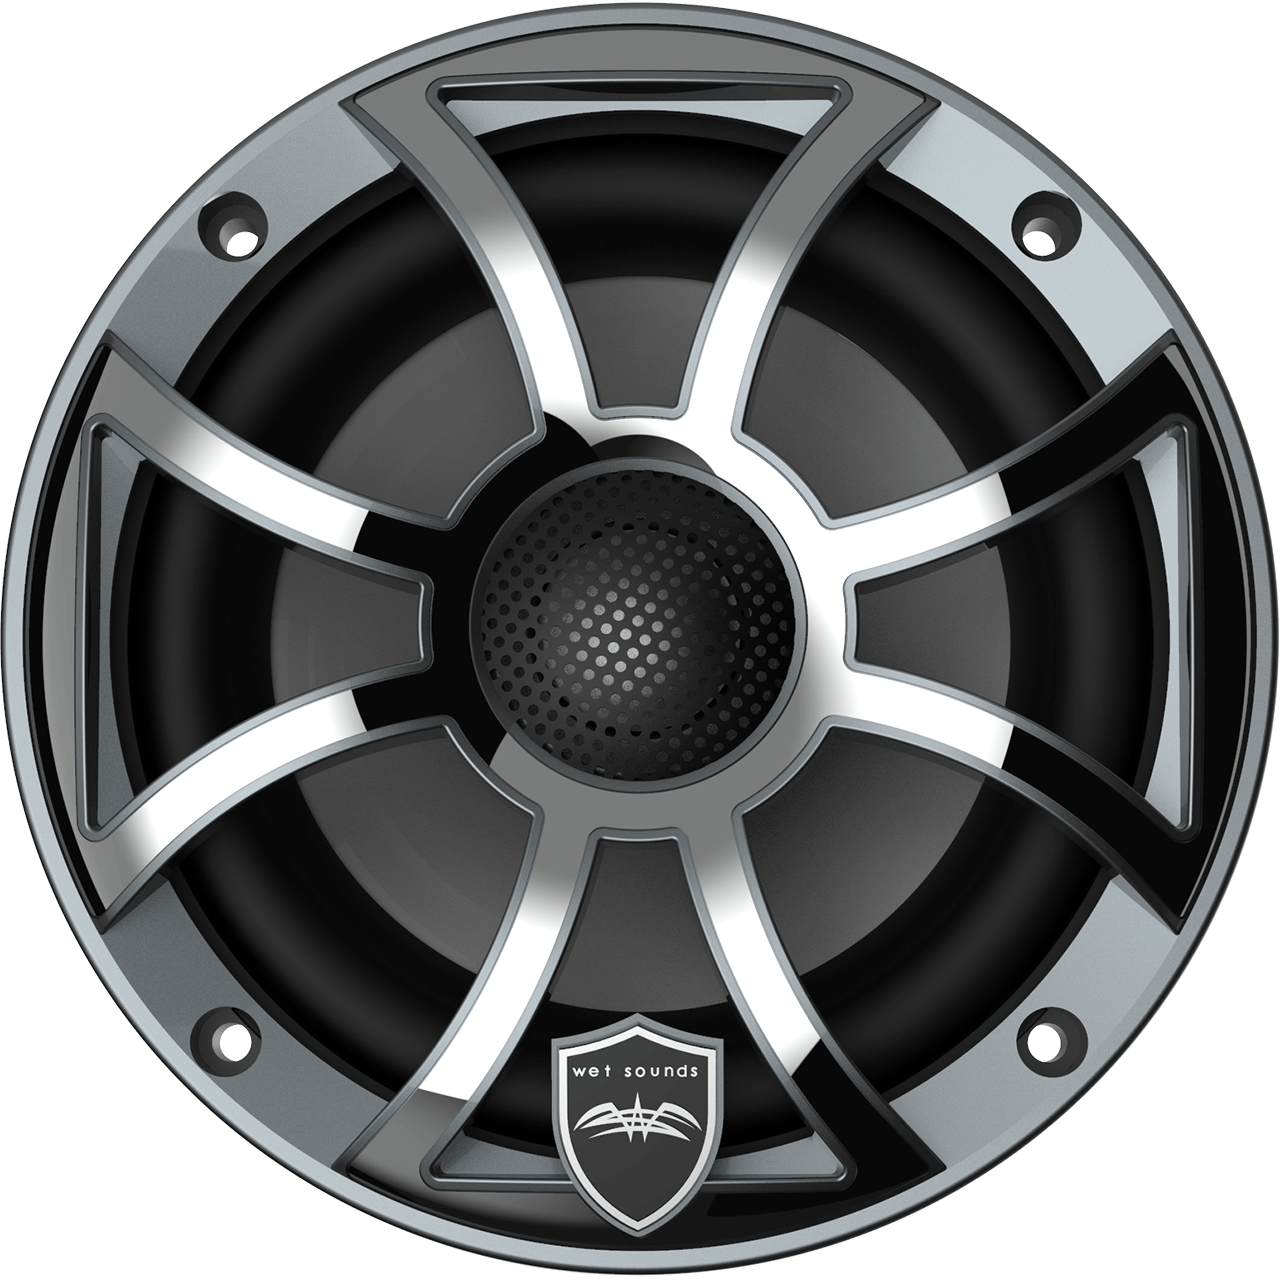 Wet Sounds Boat Boat Coax Speakers Wet Sounds REVO 6 XS-G-SS | Wet Sounds High Output Component Style 6.5" Marine Coaxial Speakers